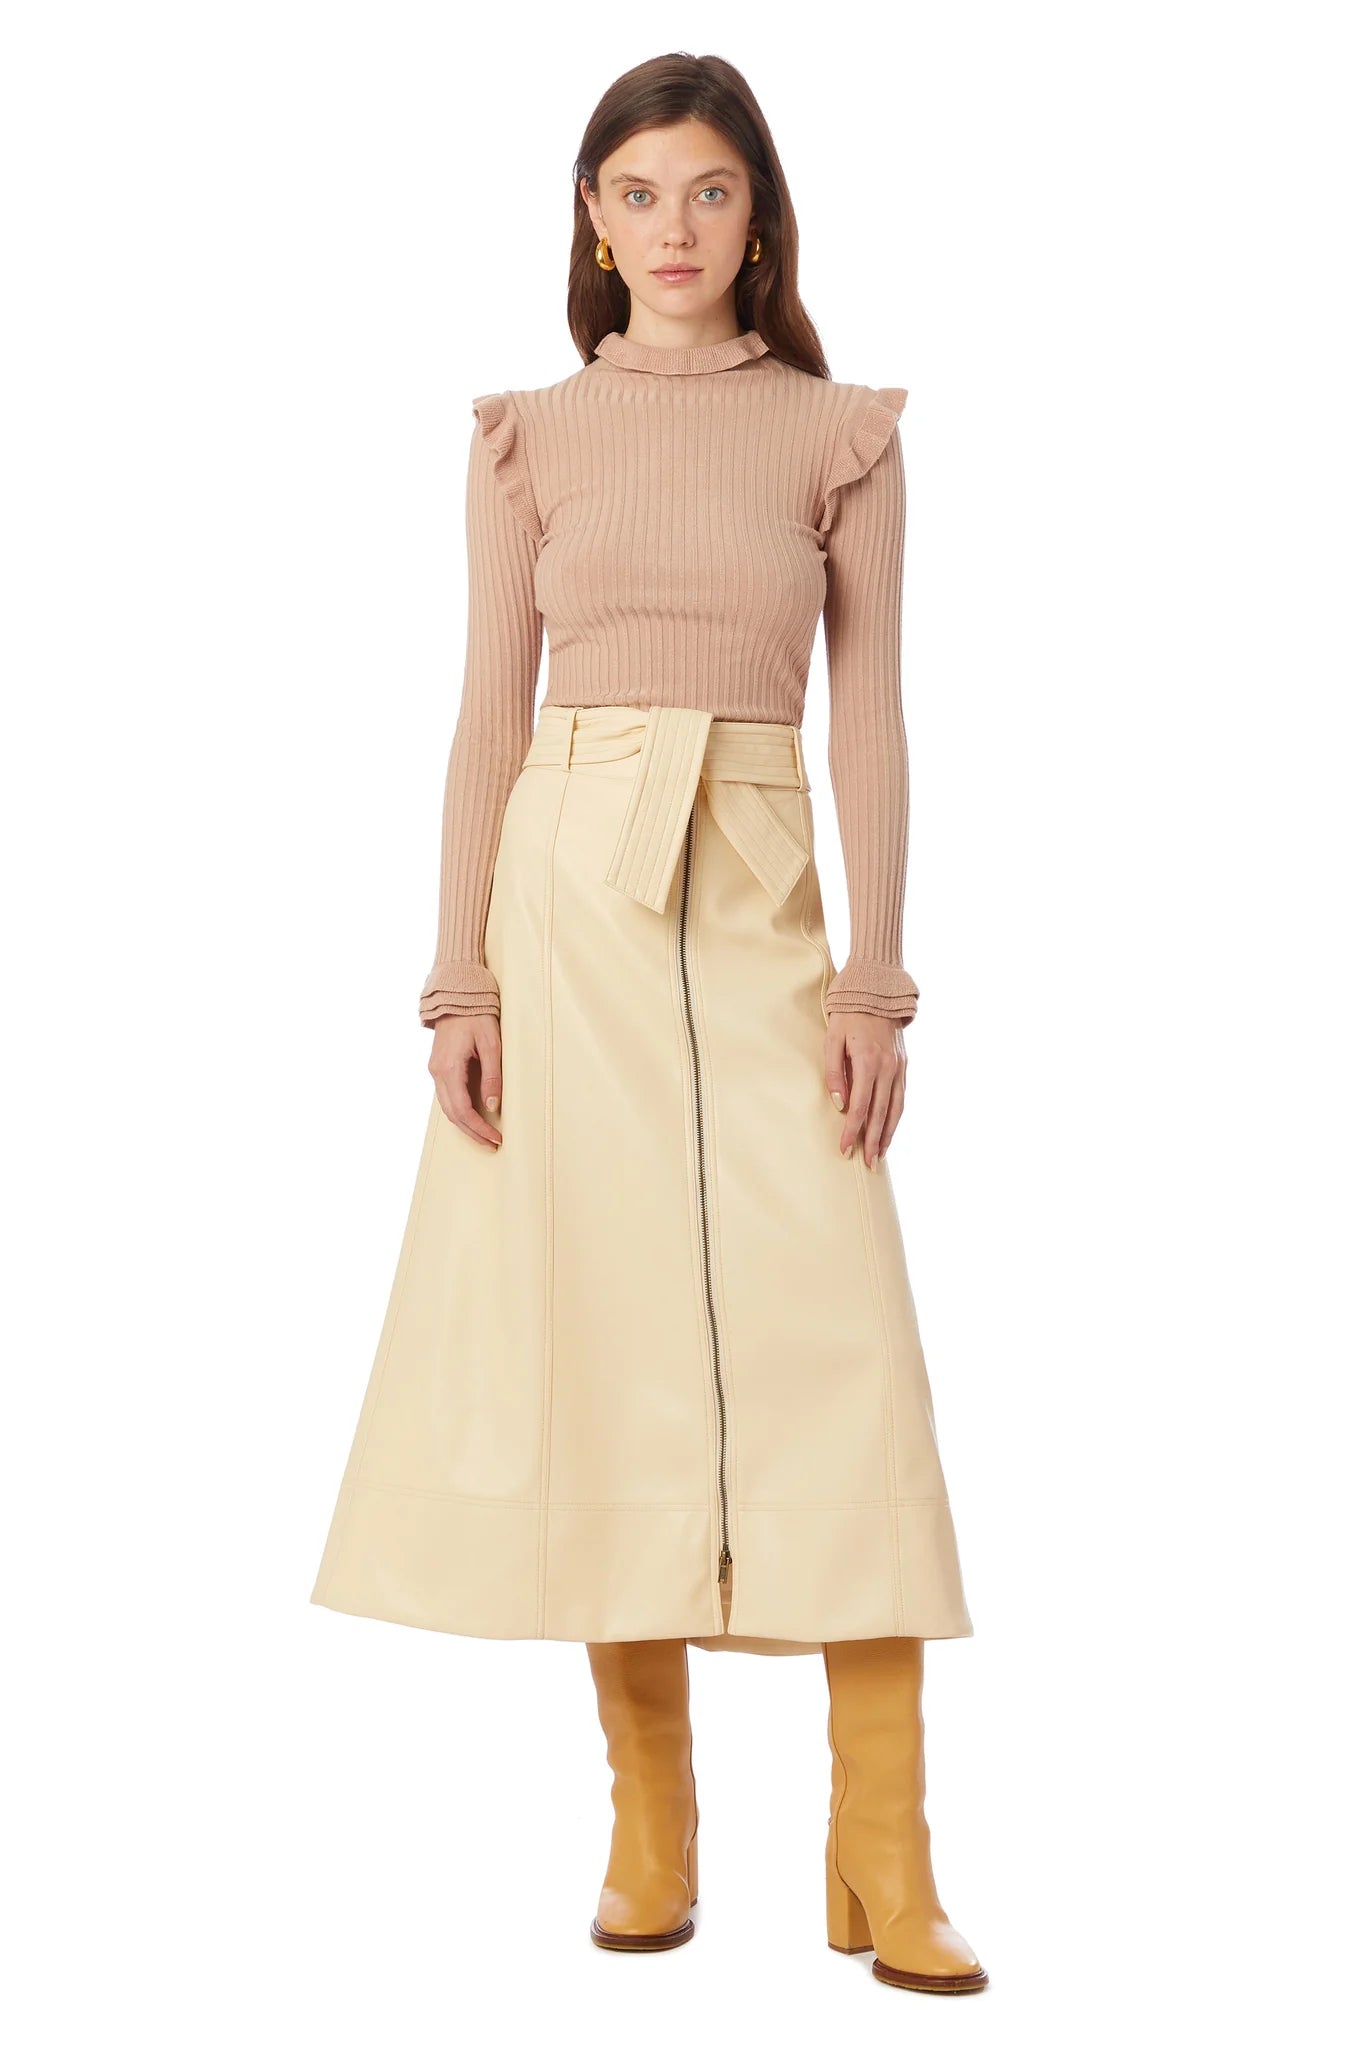 Marie Oliver Greenwich Skirt